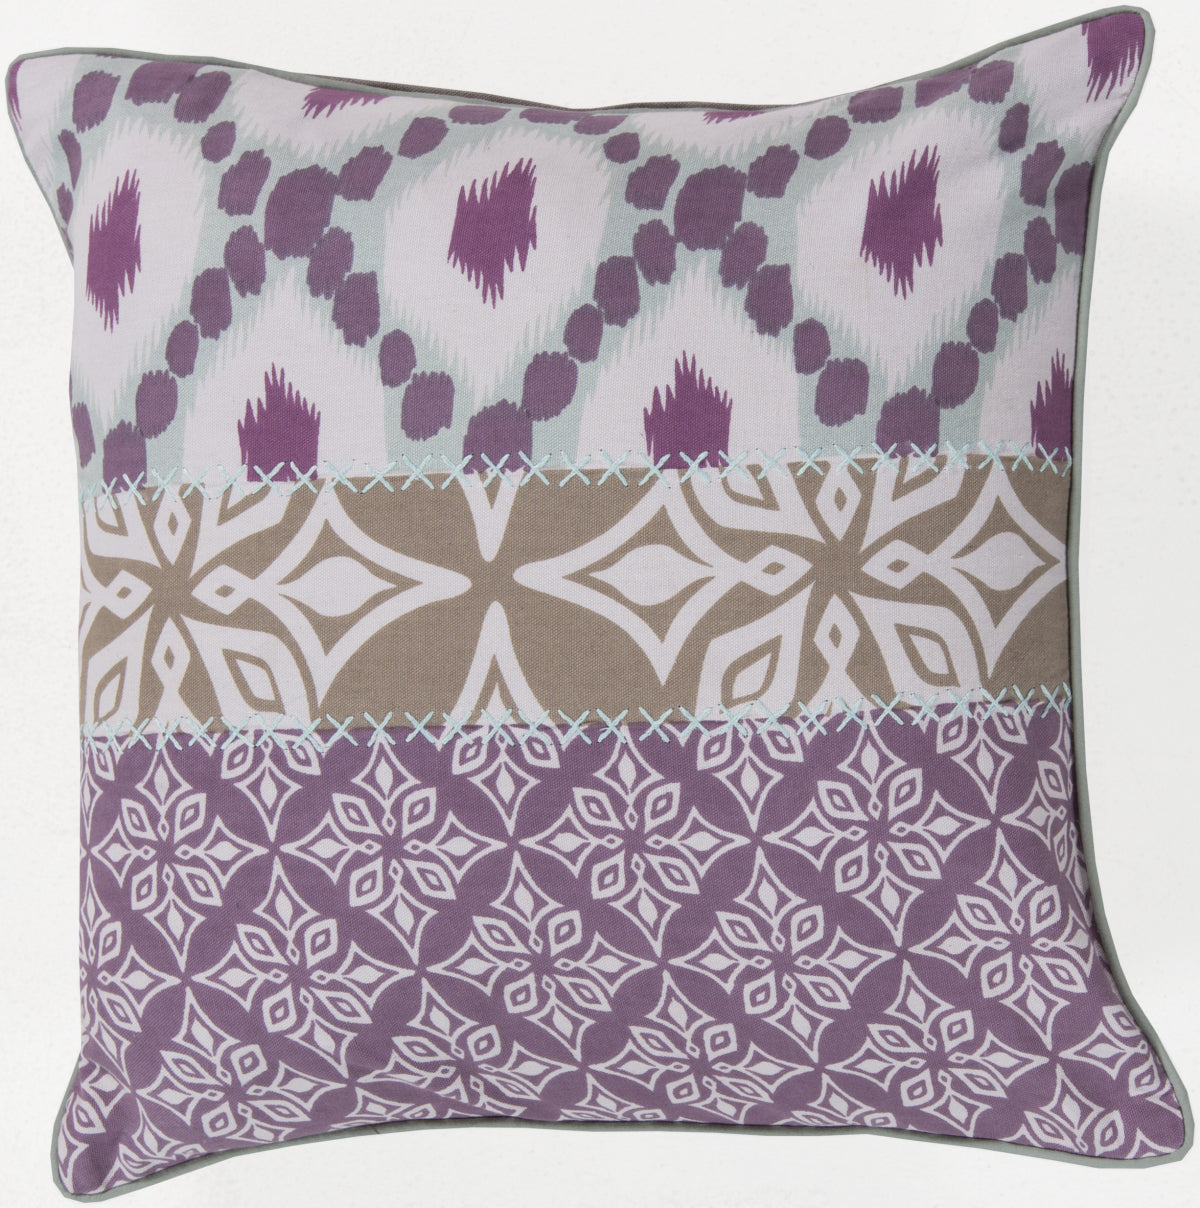 Surya Pattern Mix Layers of Luxury KS-005 Pillow by Kate Spain main image